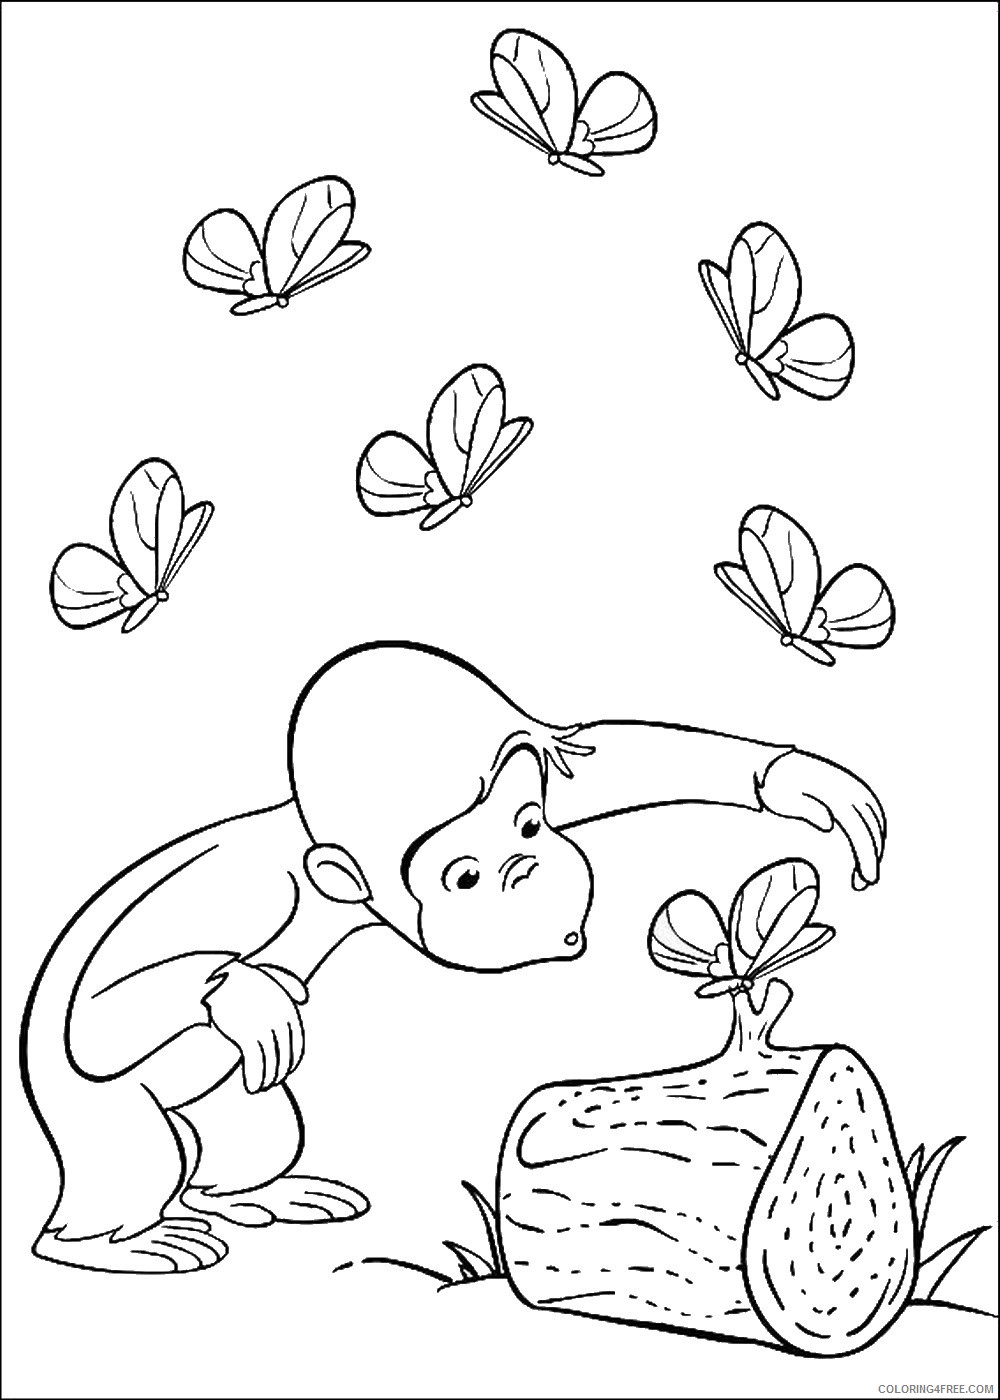 Curious George Coloring Pages Cartoons curious_george_cl20 Printable 2020 1886 Coloring4free